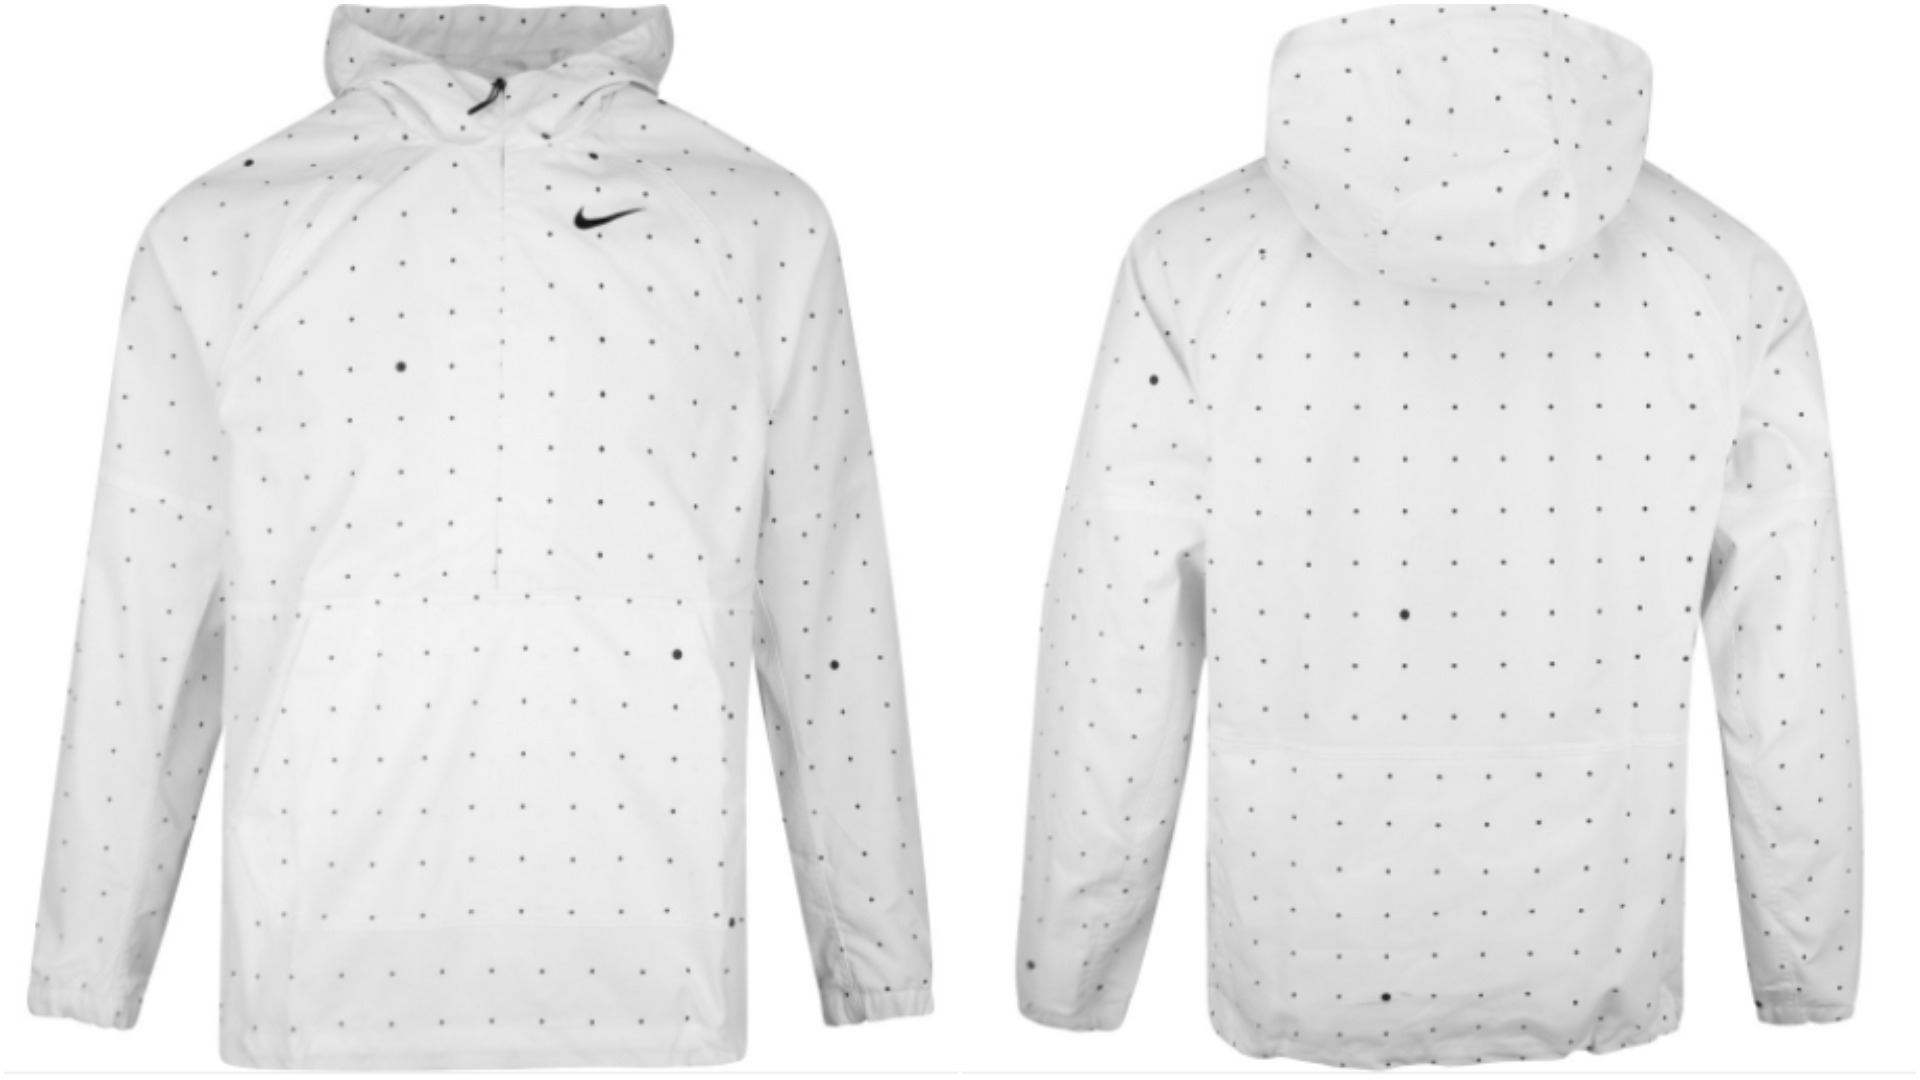 Nike Golf launches new NK Repel Golf Hoodie - SHOP HERE! | GolfMagic